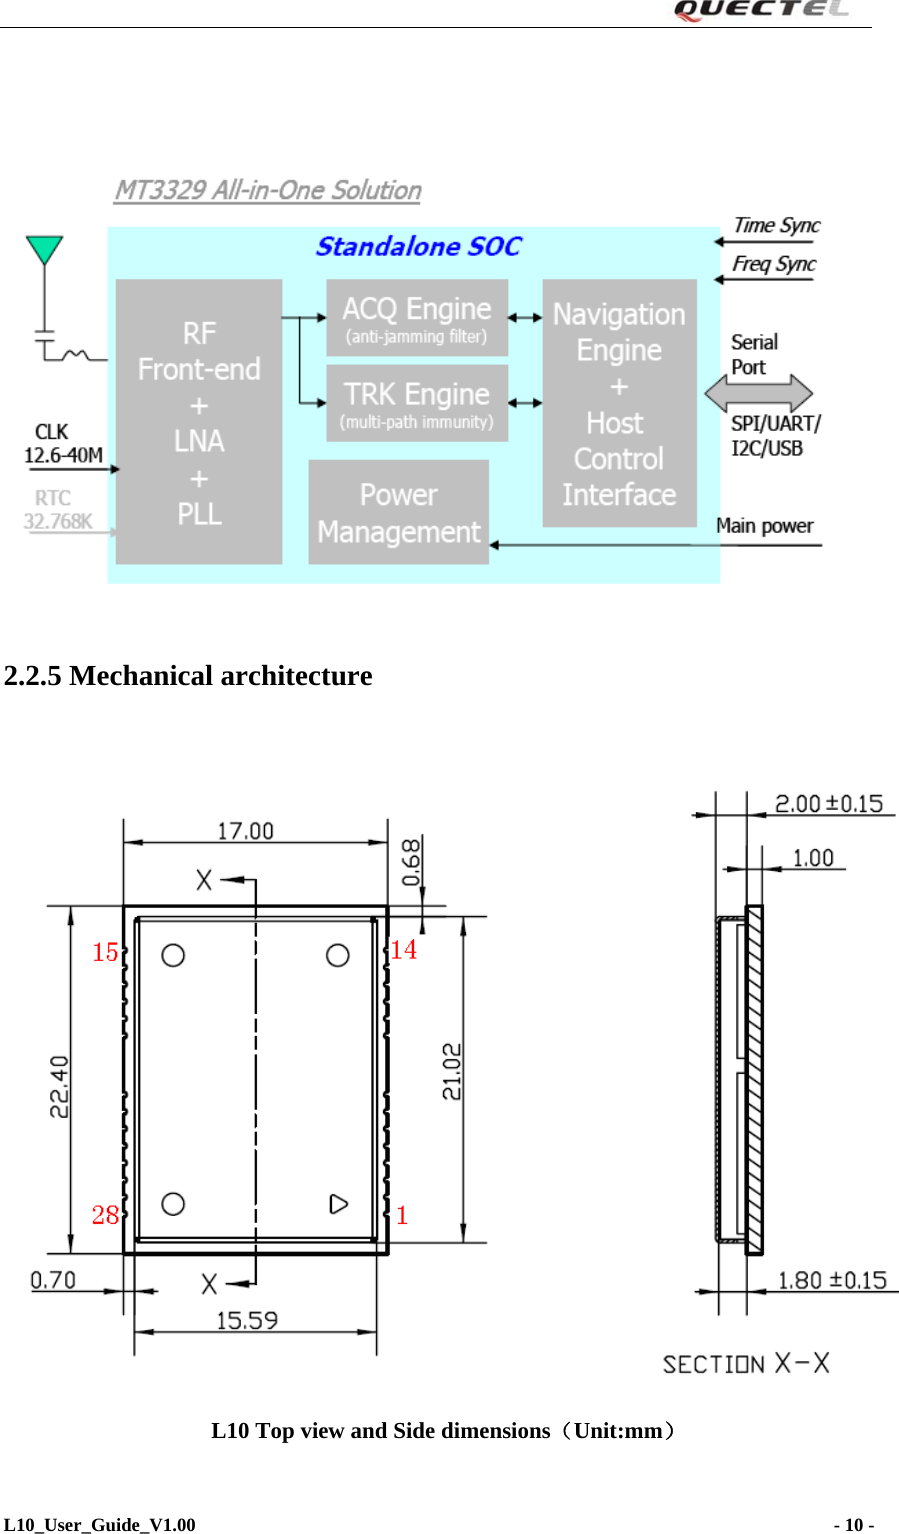                                                                         2.2.5 Mechanical architecture     L10 Top view and Side dimensions（Unit:mm） L10_User_Guide_V1.00                                                                    - 10 -   